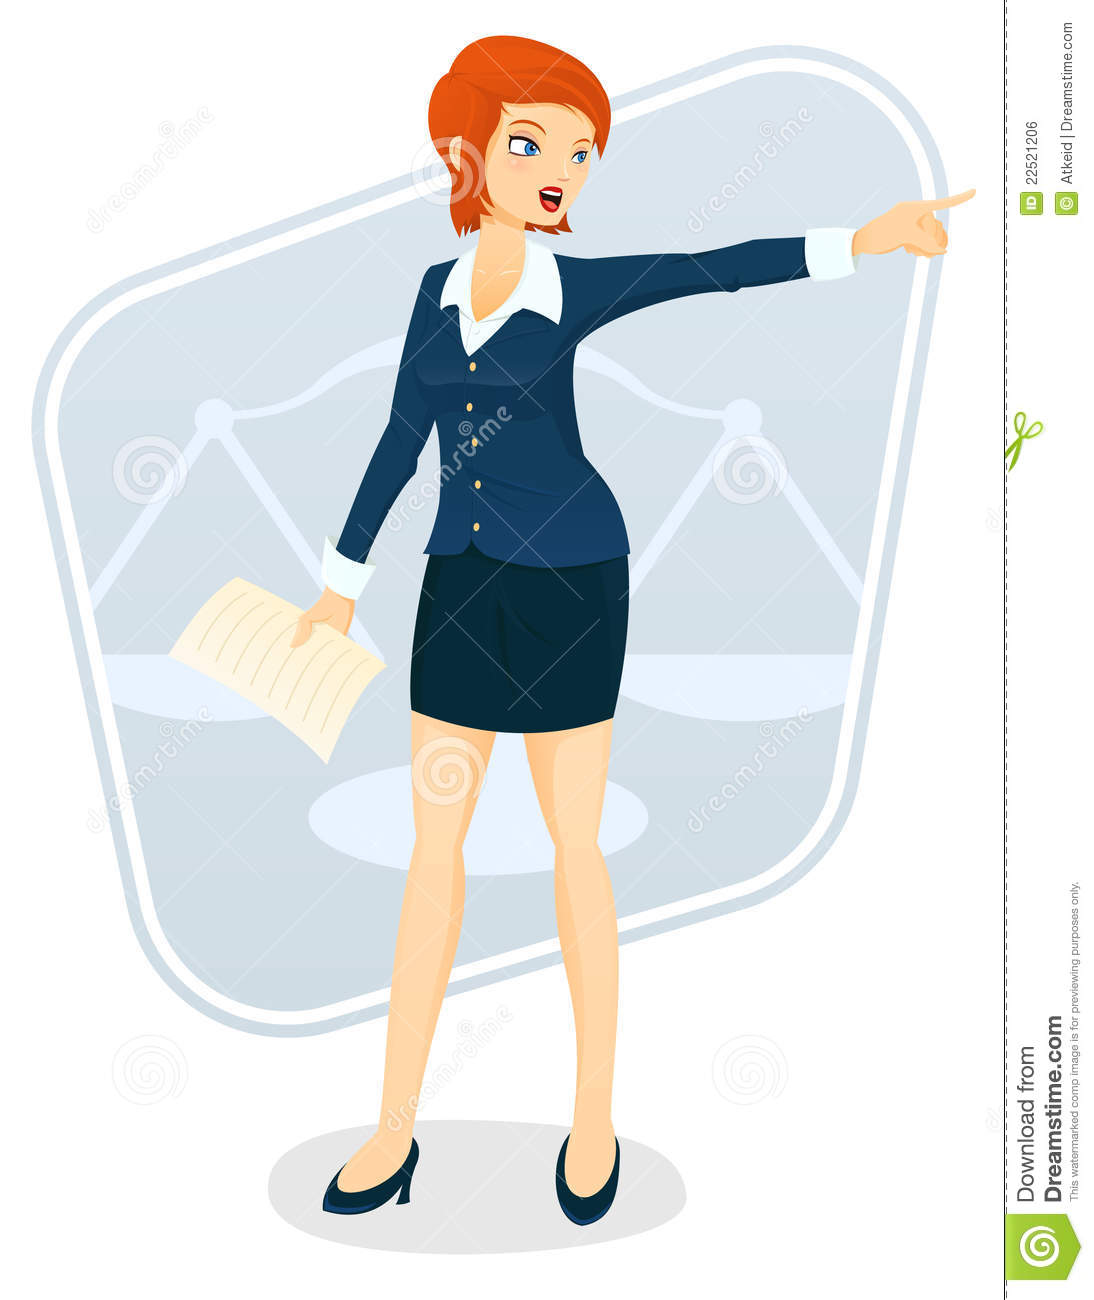 Vector Illustration Of A Beautiful Female Lawyer Making An Argument